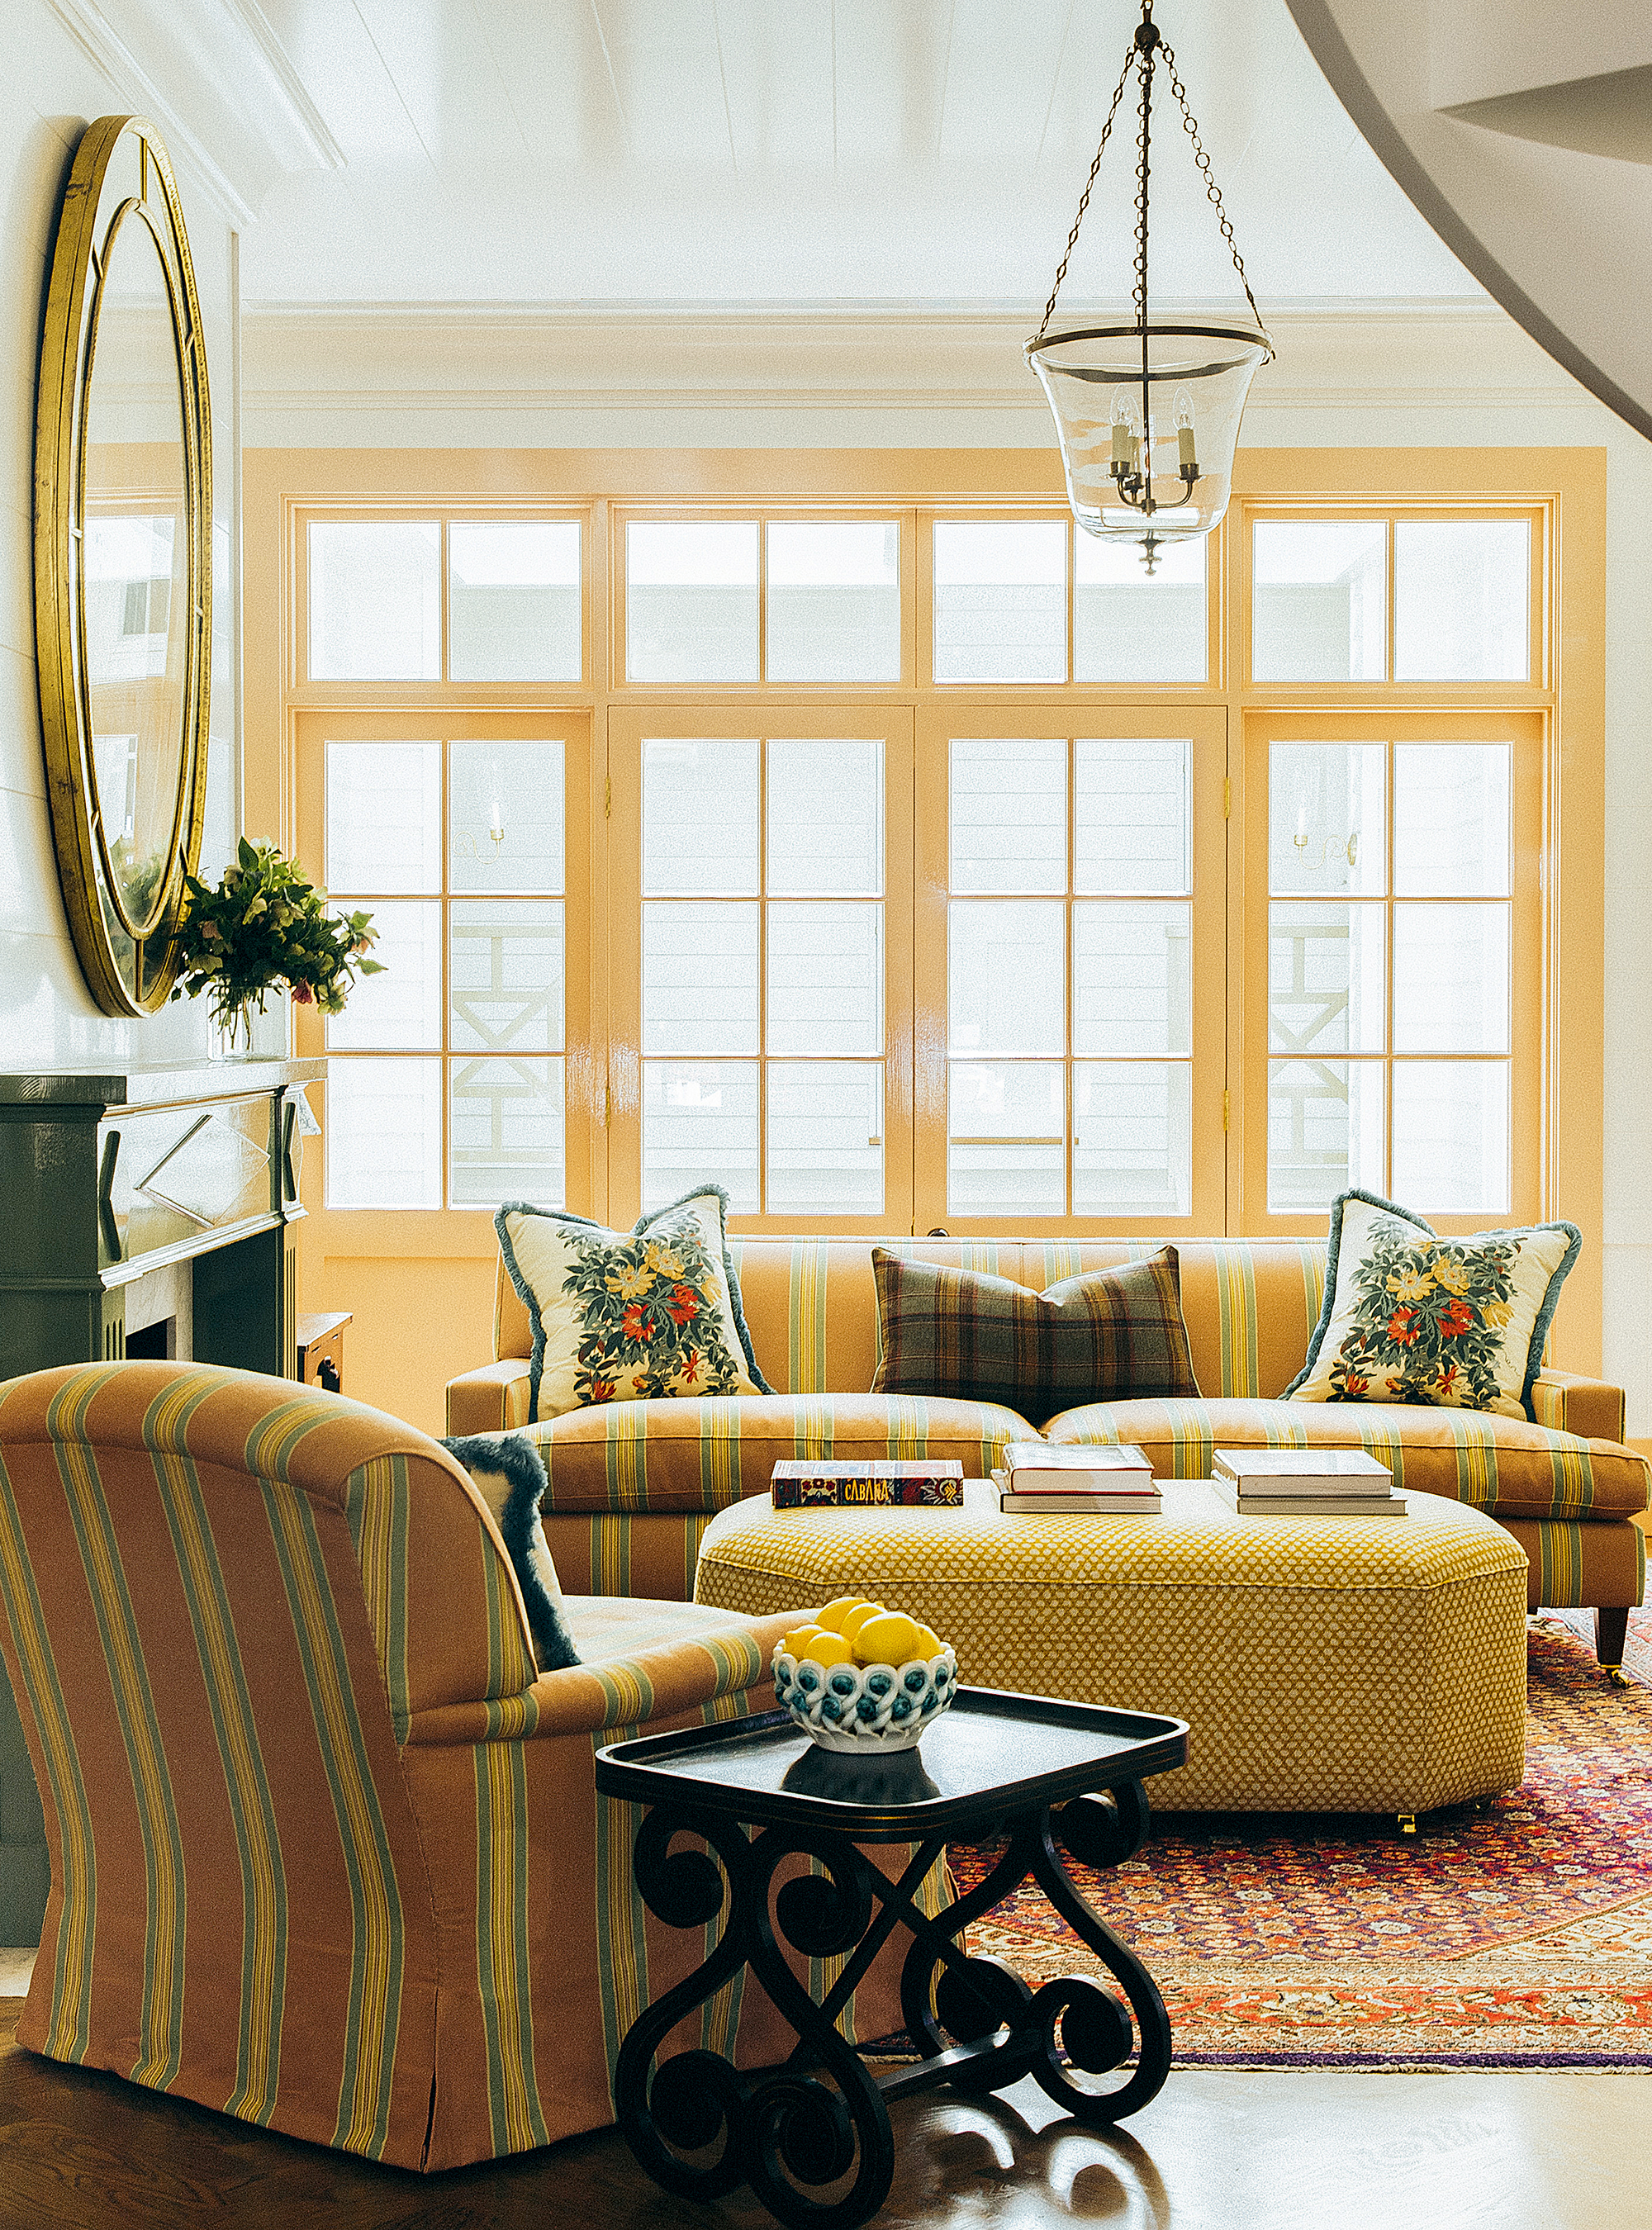 Living room with yellow sofa, and yellow painted window frames